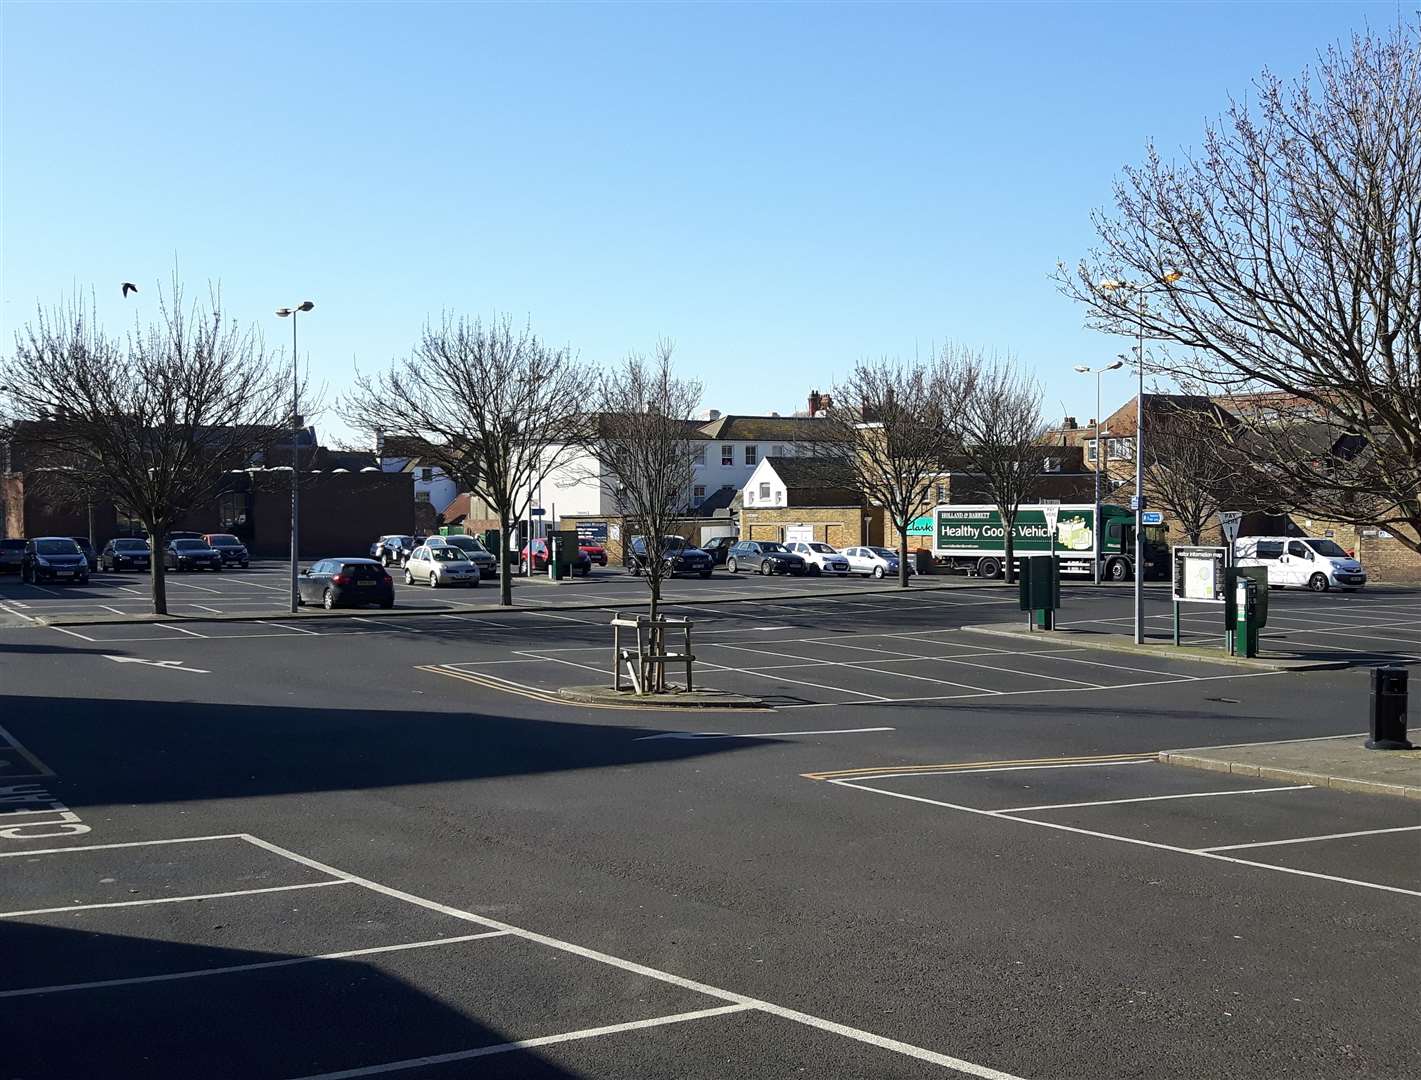 Car parks across the district will be free after 3pm Monday to Friday in December